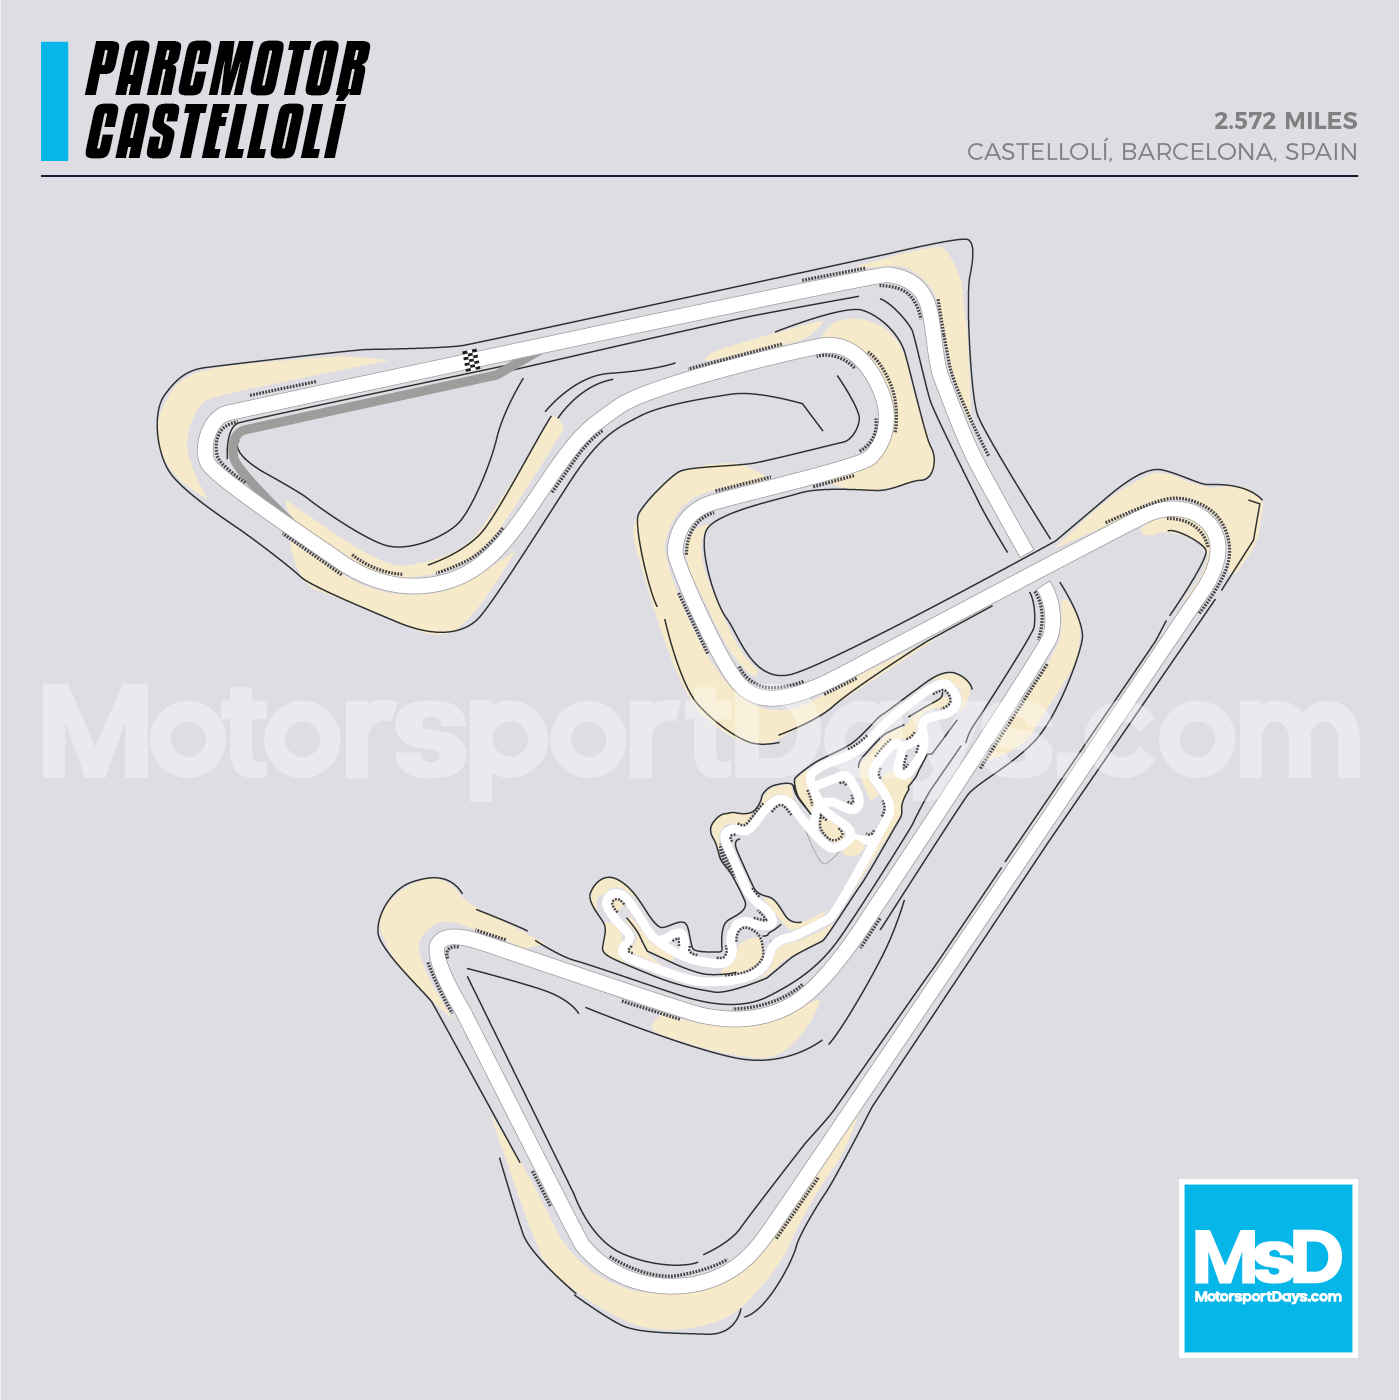 Parcmotor Castellolí-Circuit-track-map.png